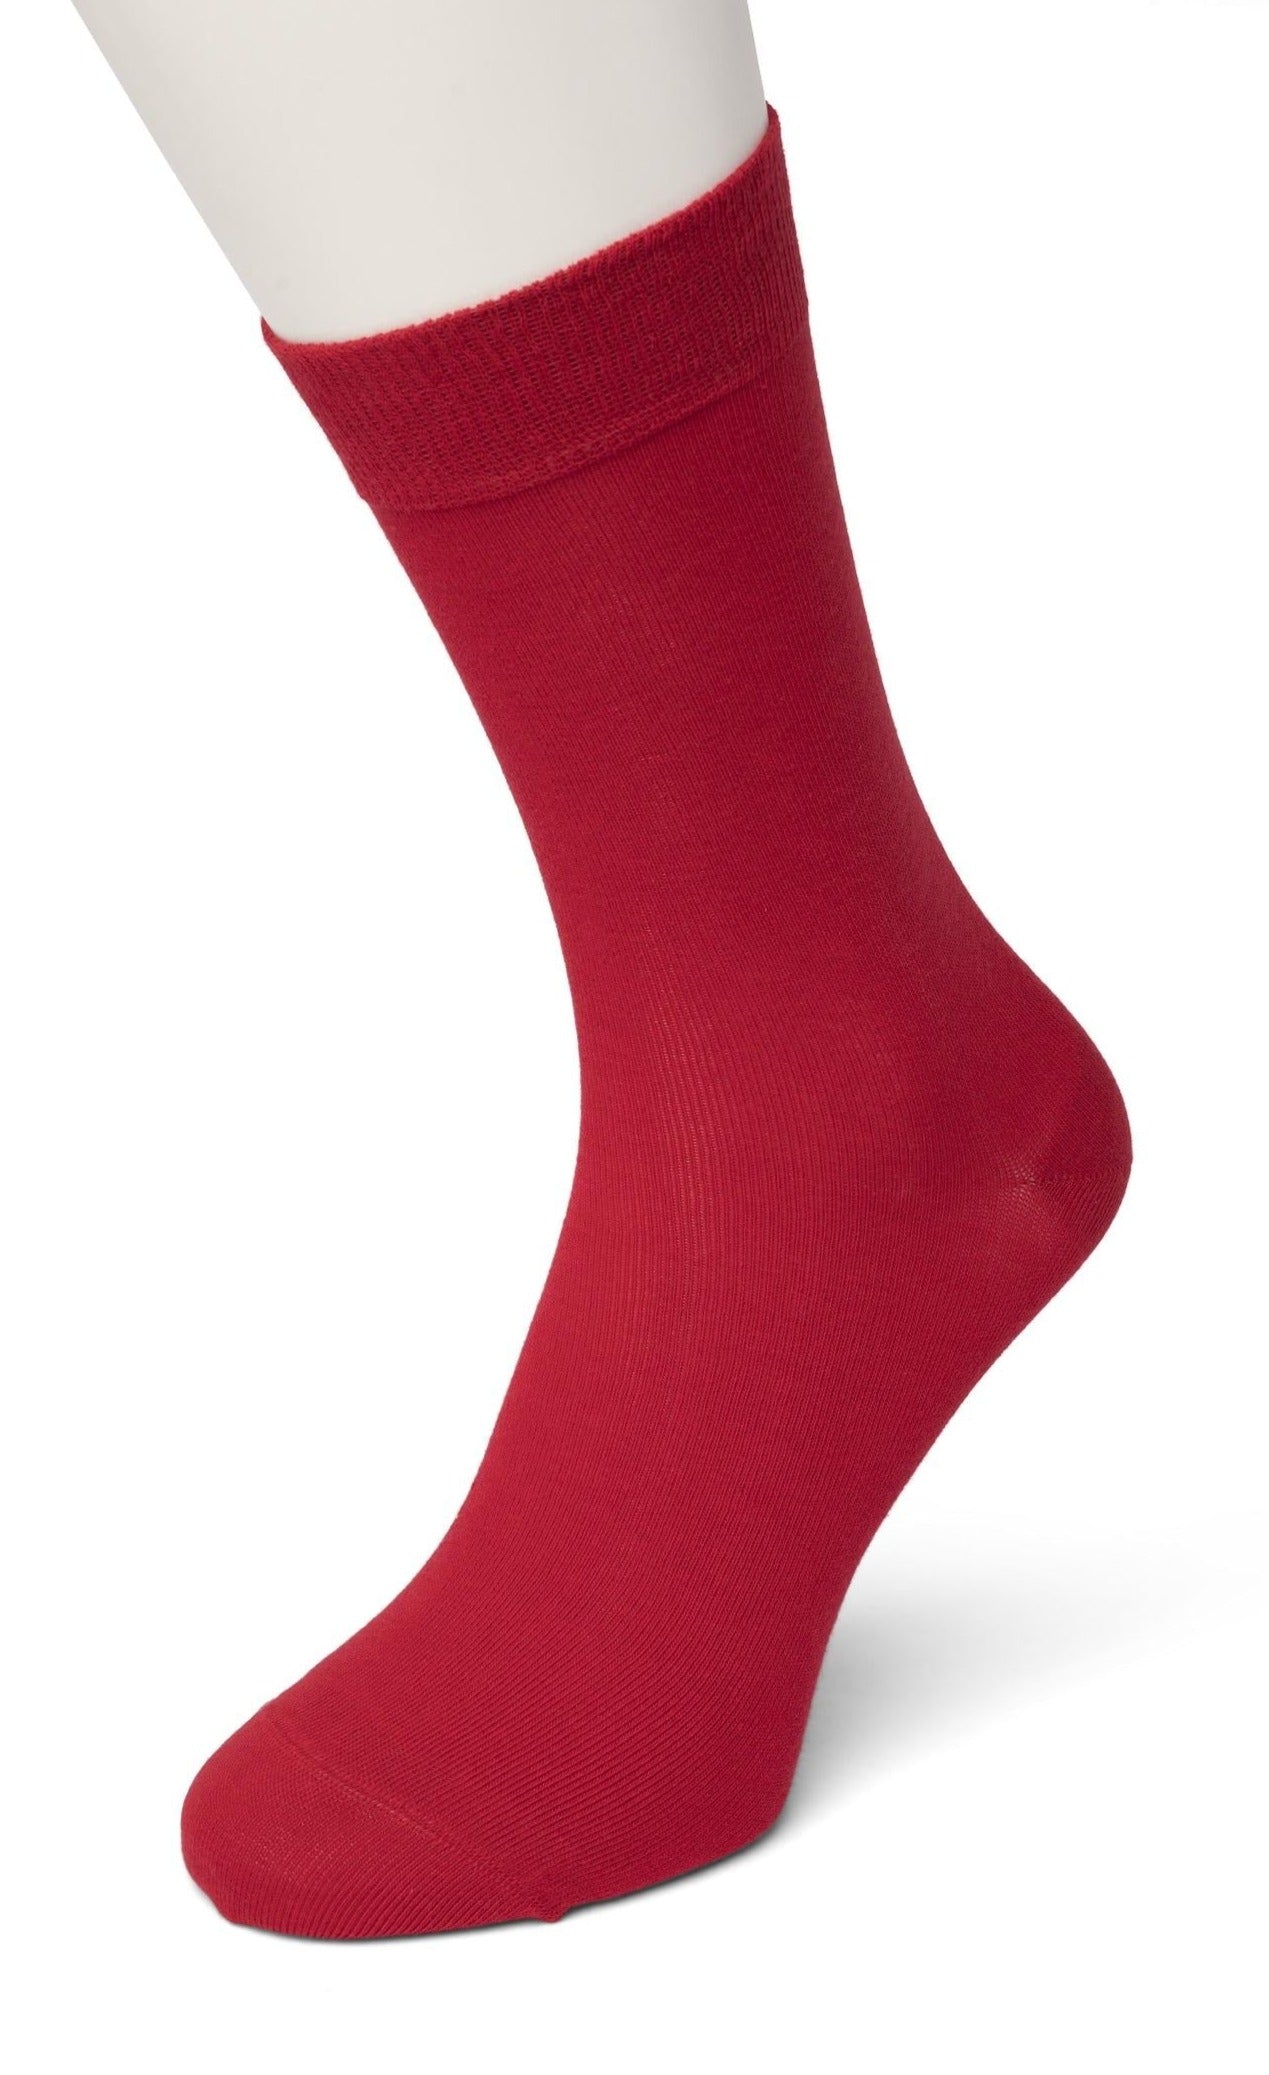 Bonnie Doon 83422 Cotton Sock -  Strawberry Red ankle socks available in men and women sizes